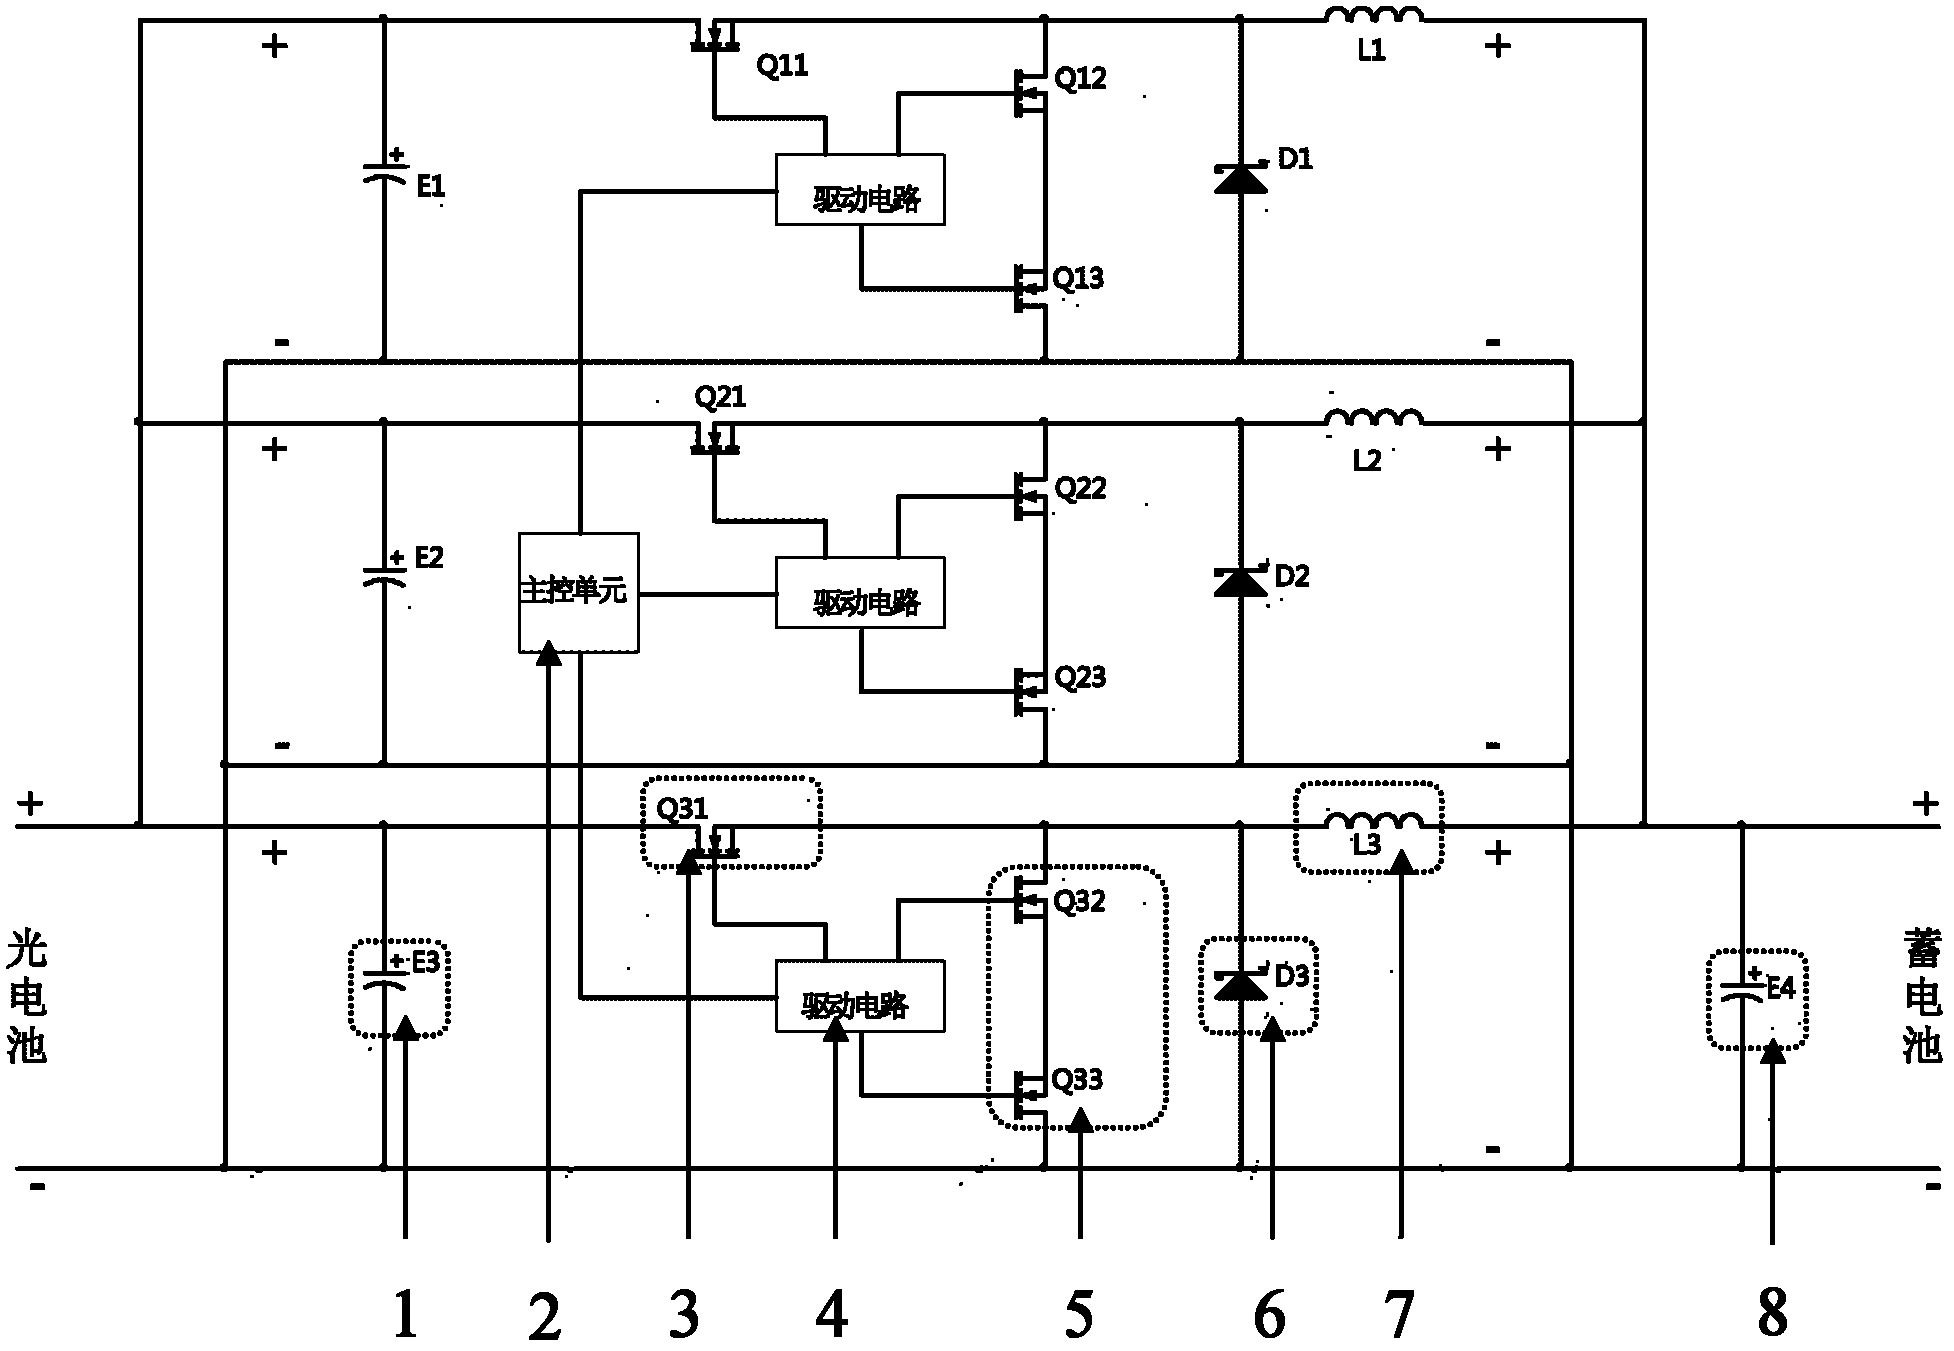 Multiphase synchronous rectification BUCK topology circuit